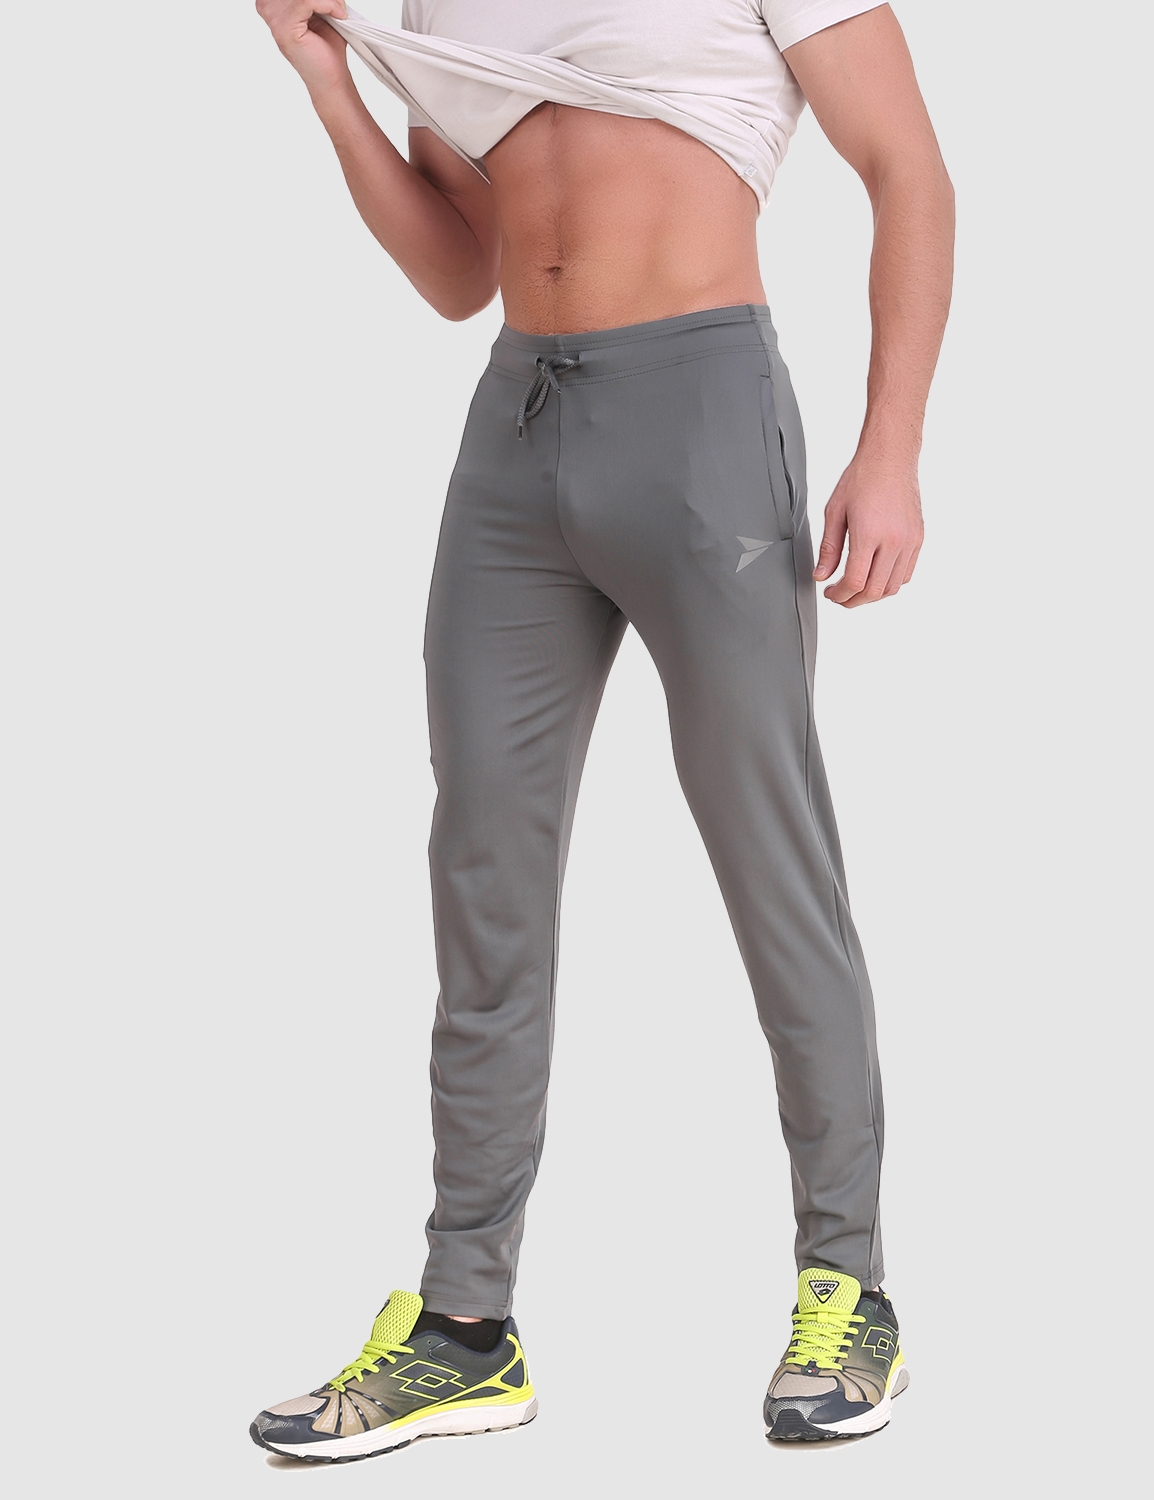 Fitinc Slim Fit Grey Track Pant for Workout